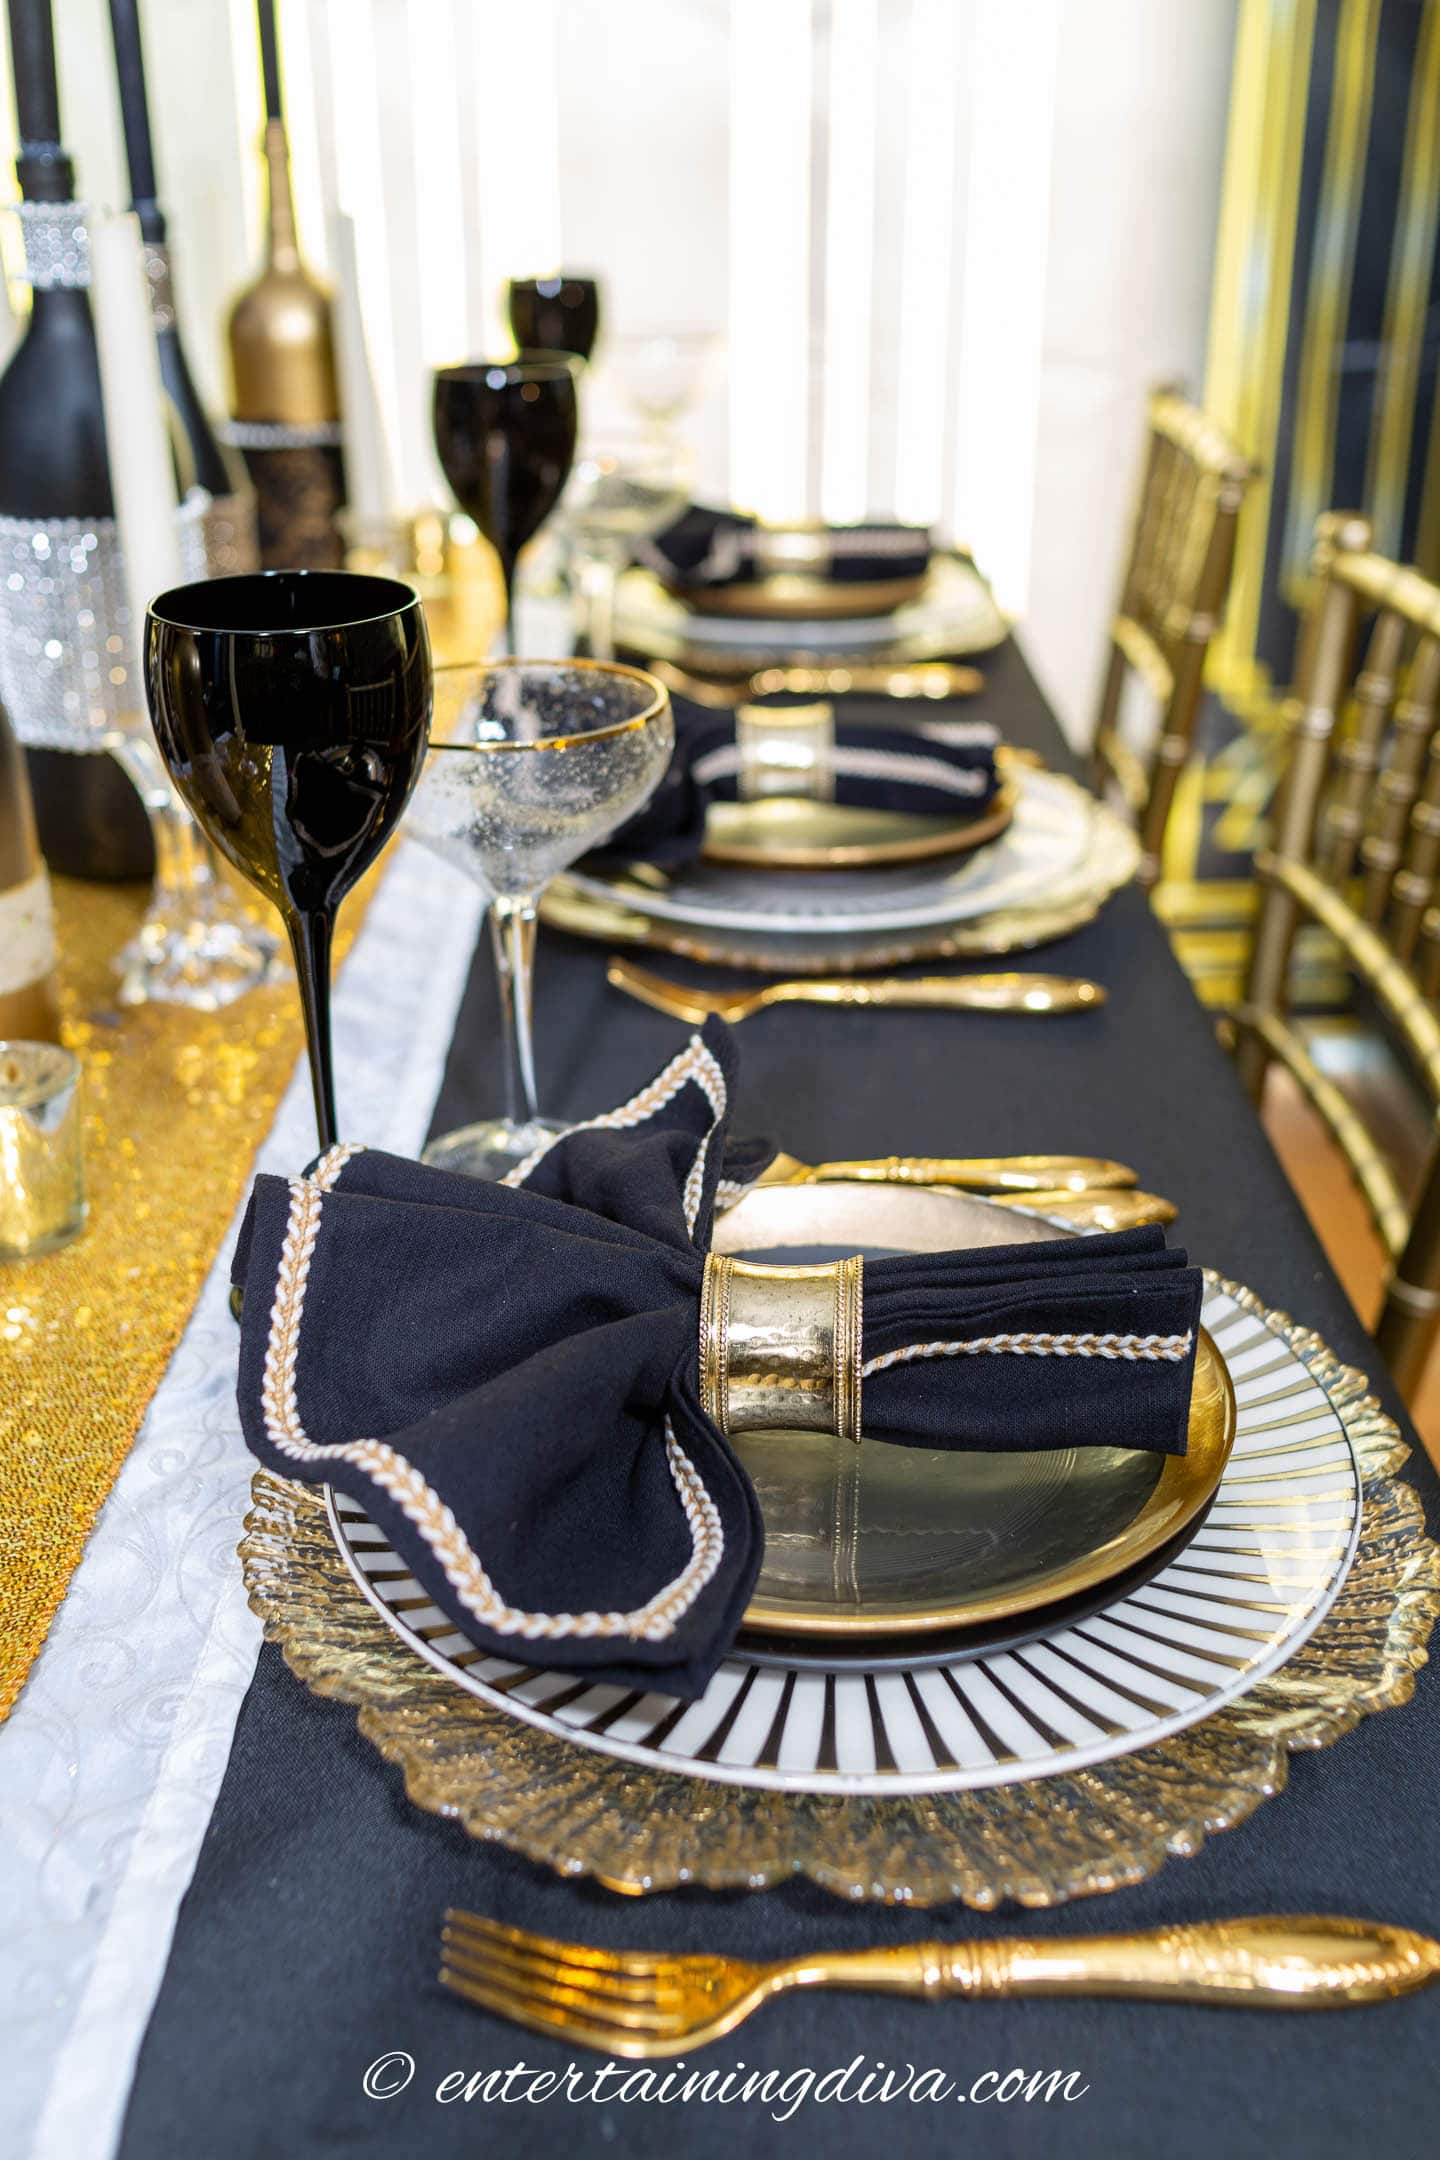 Great Gatsby party table setting with black, white and gold